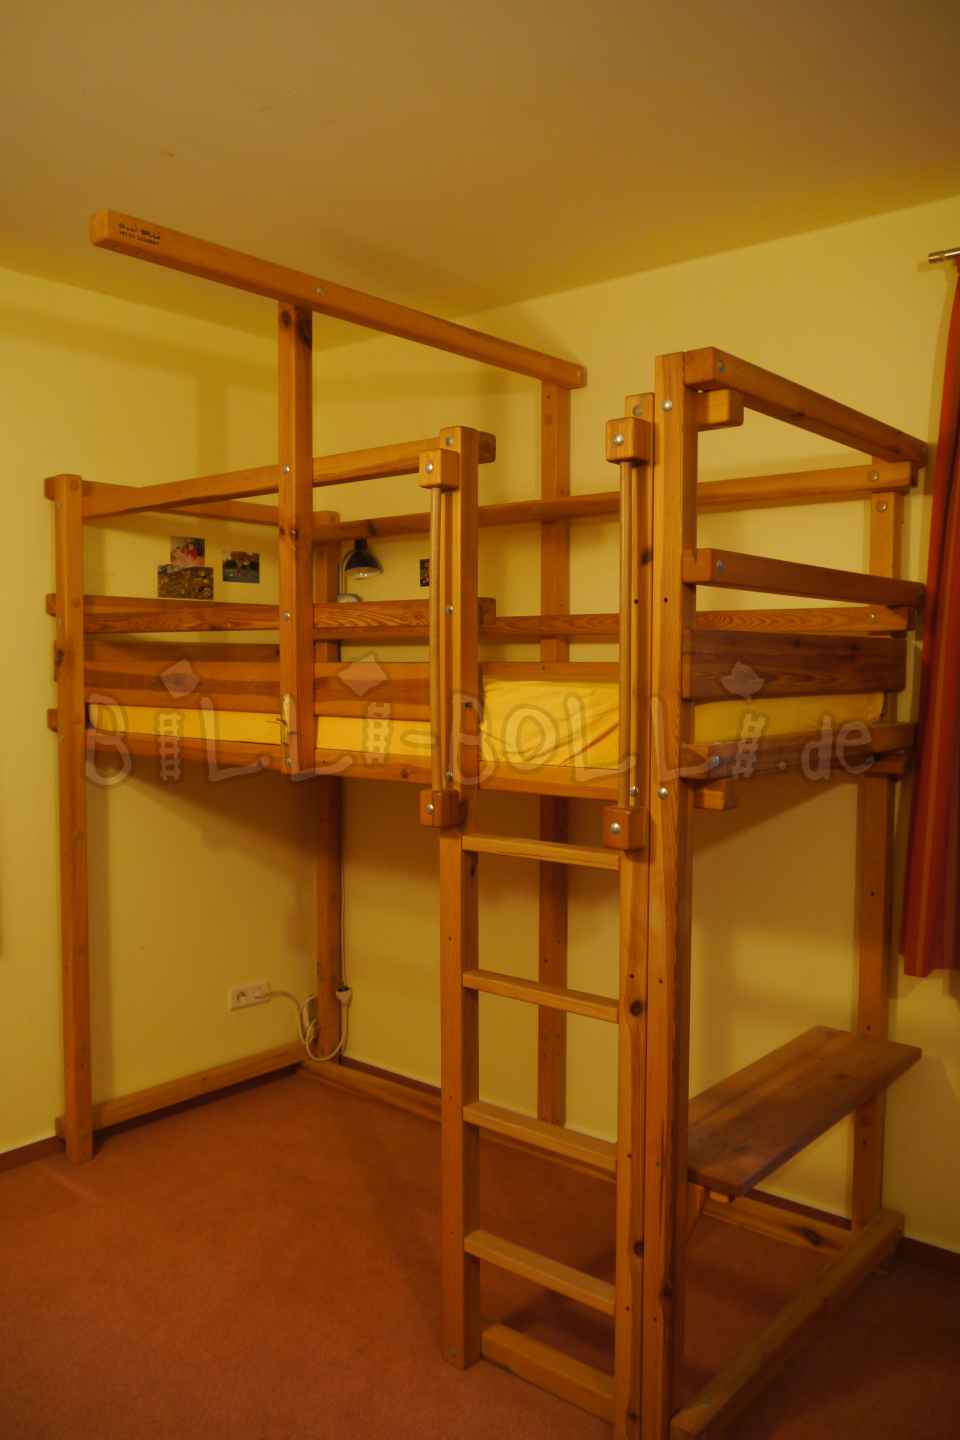 2x Growing loft bed, 90 x 200 cm, honey-colored oiled pine (Category: second hand loft bed)